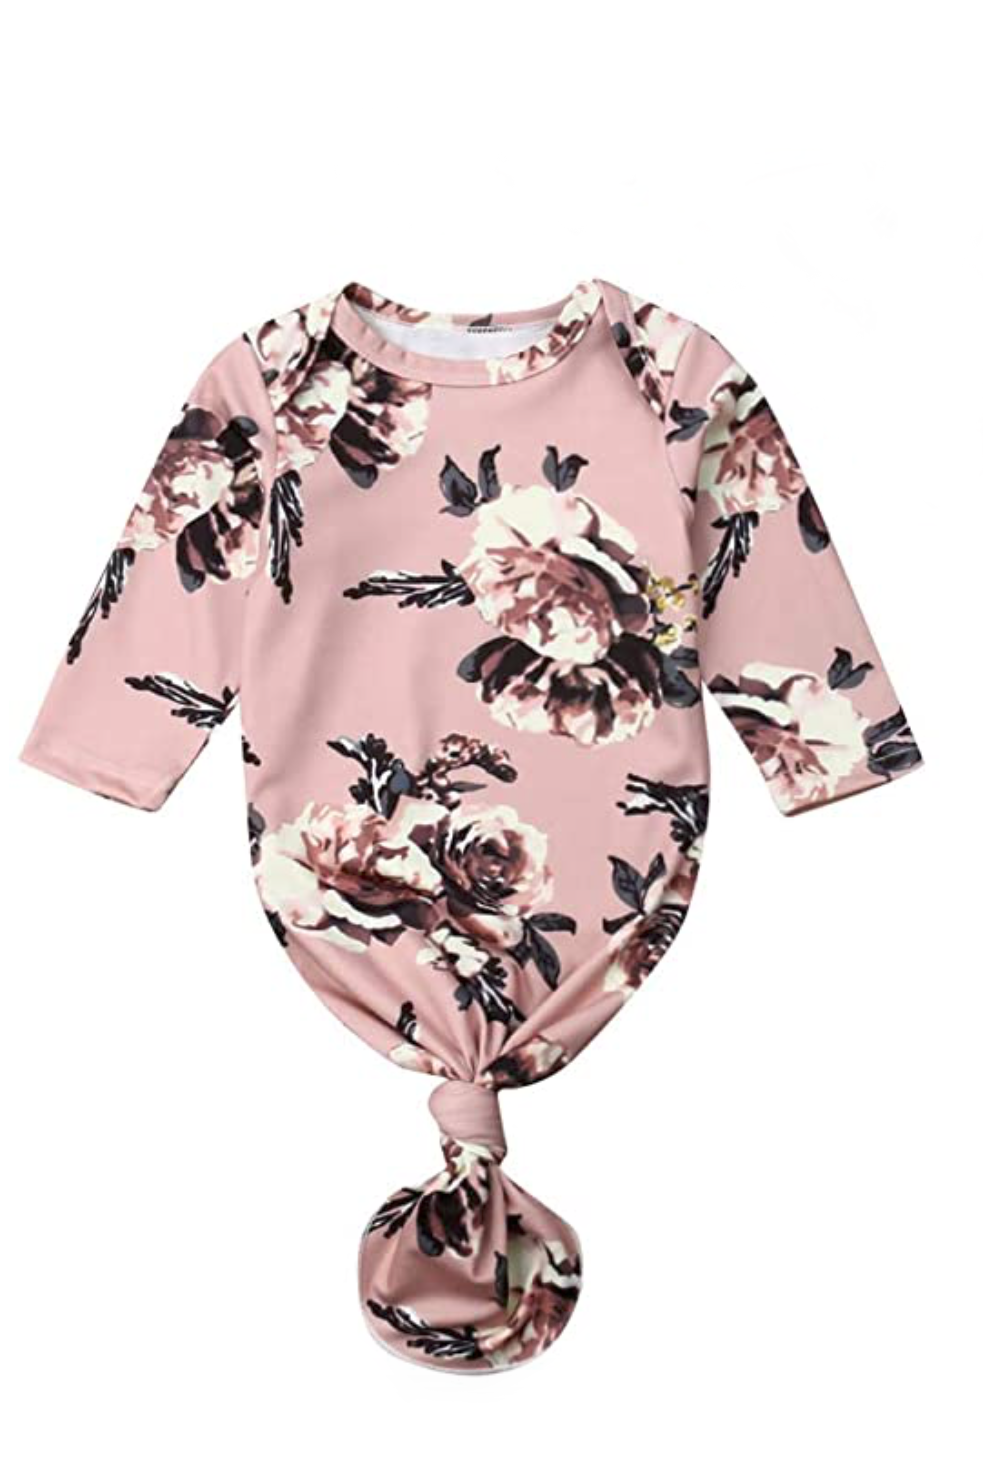 babeleven pink floral baby gown newborn photographer.png